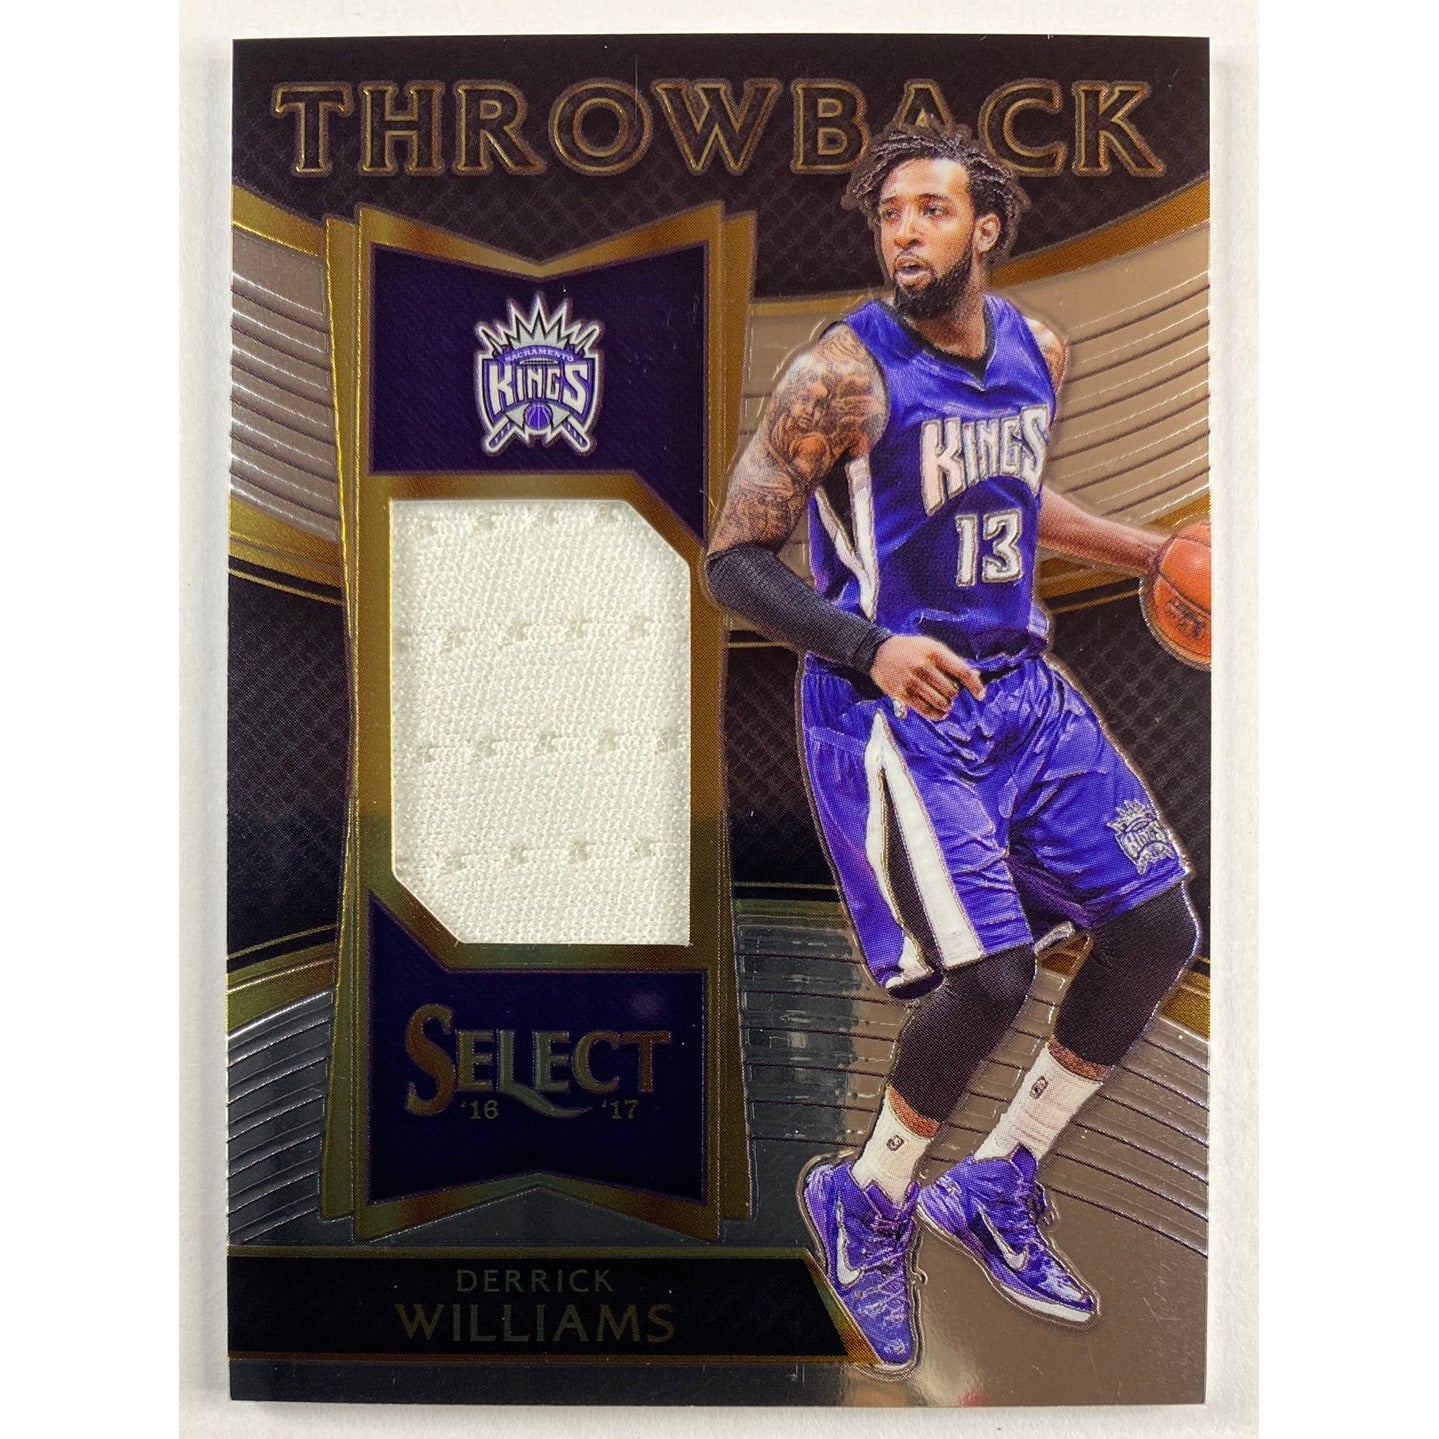 2016-17 Select Derrick Williams Throwback Threads /199